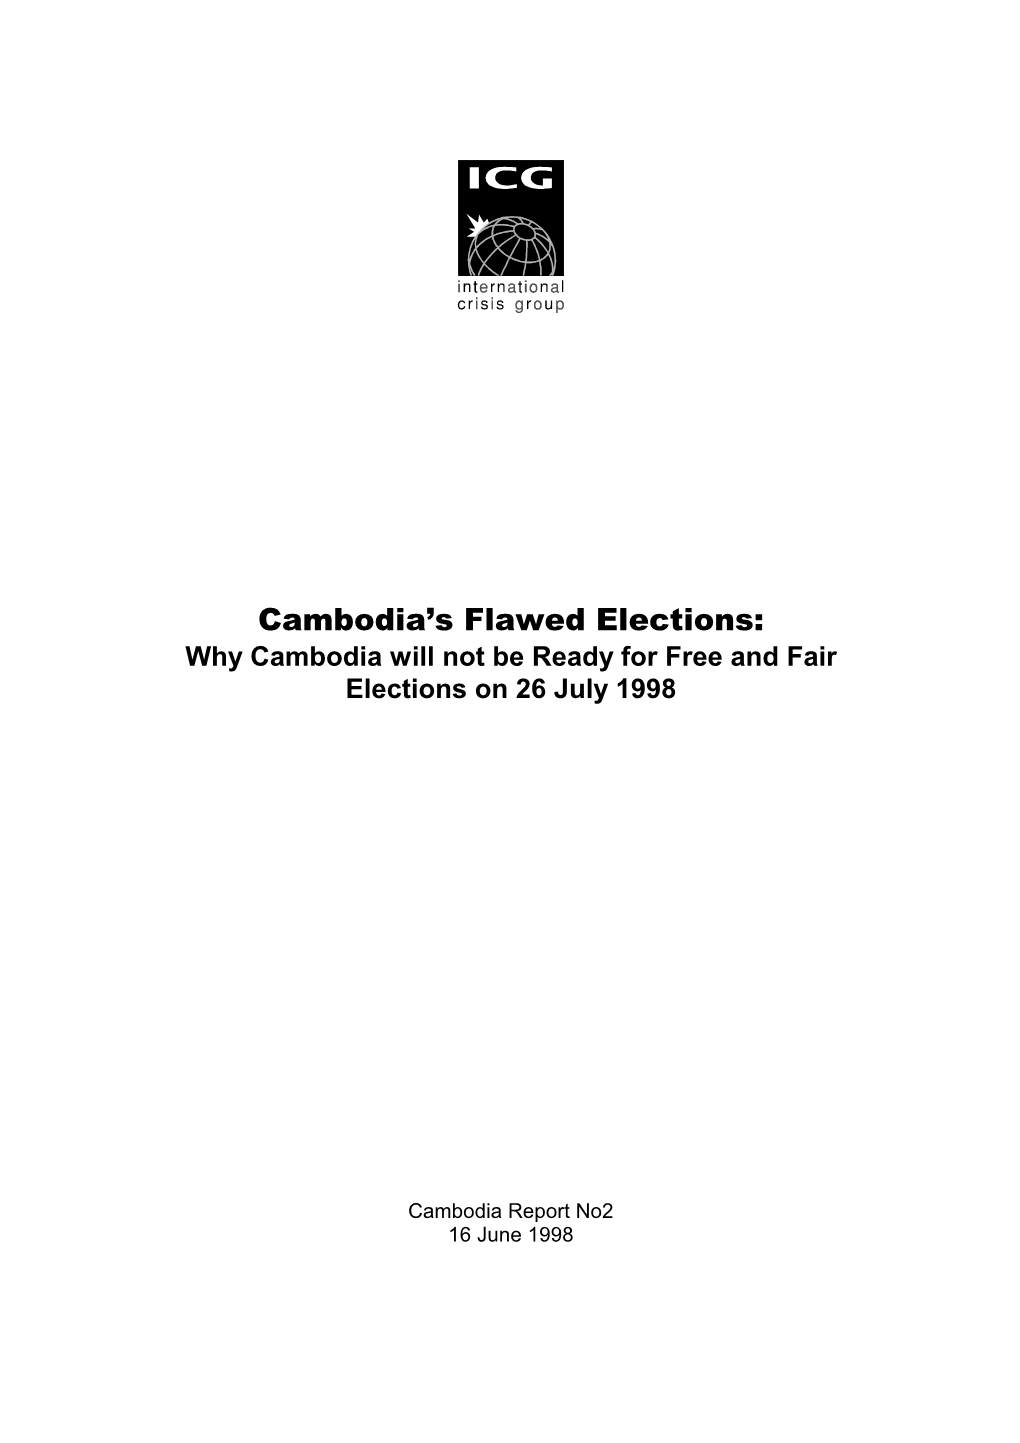 Asia Report, Nr. 2: Cambodia's Flawed Elections